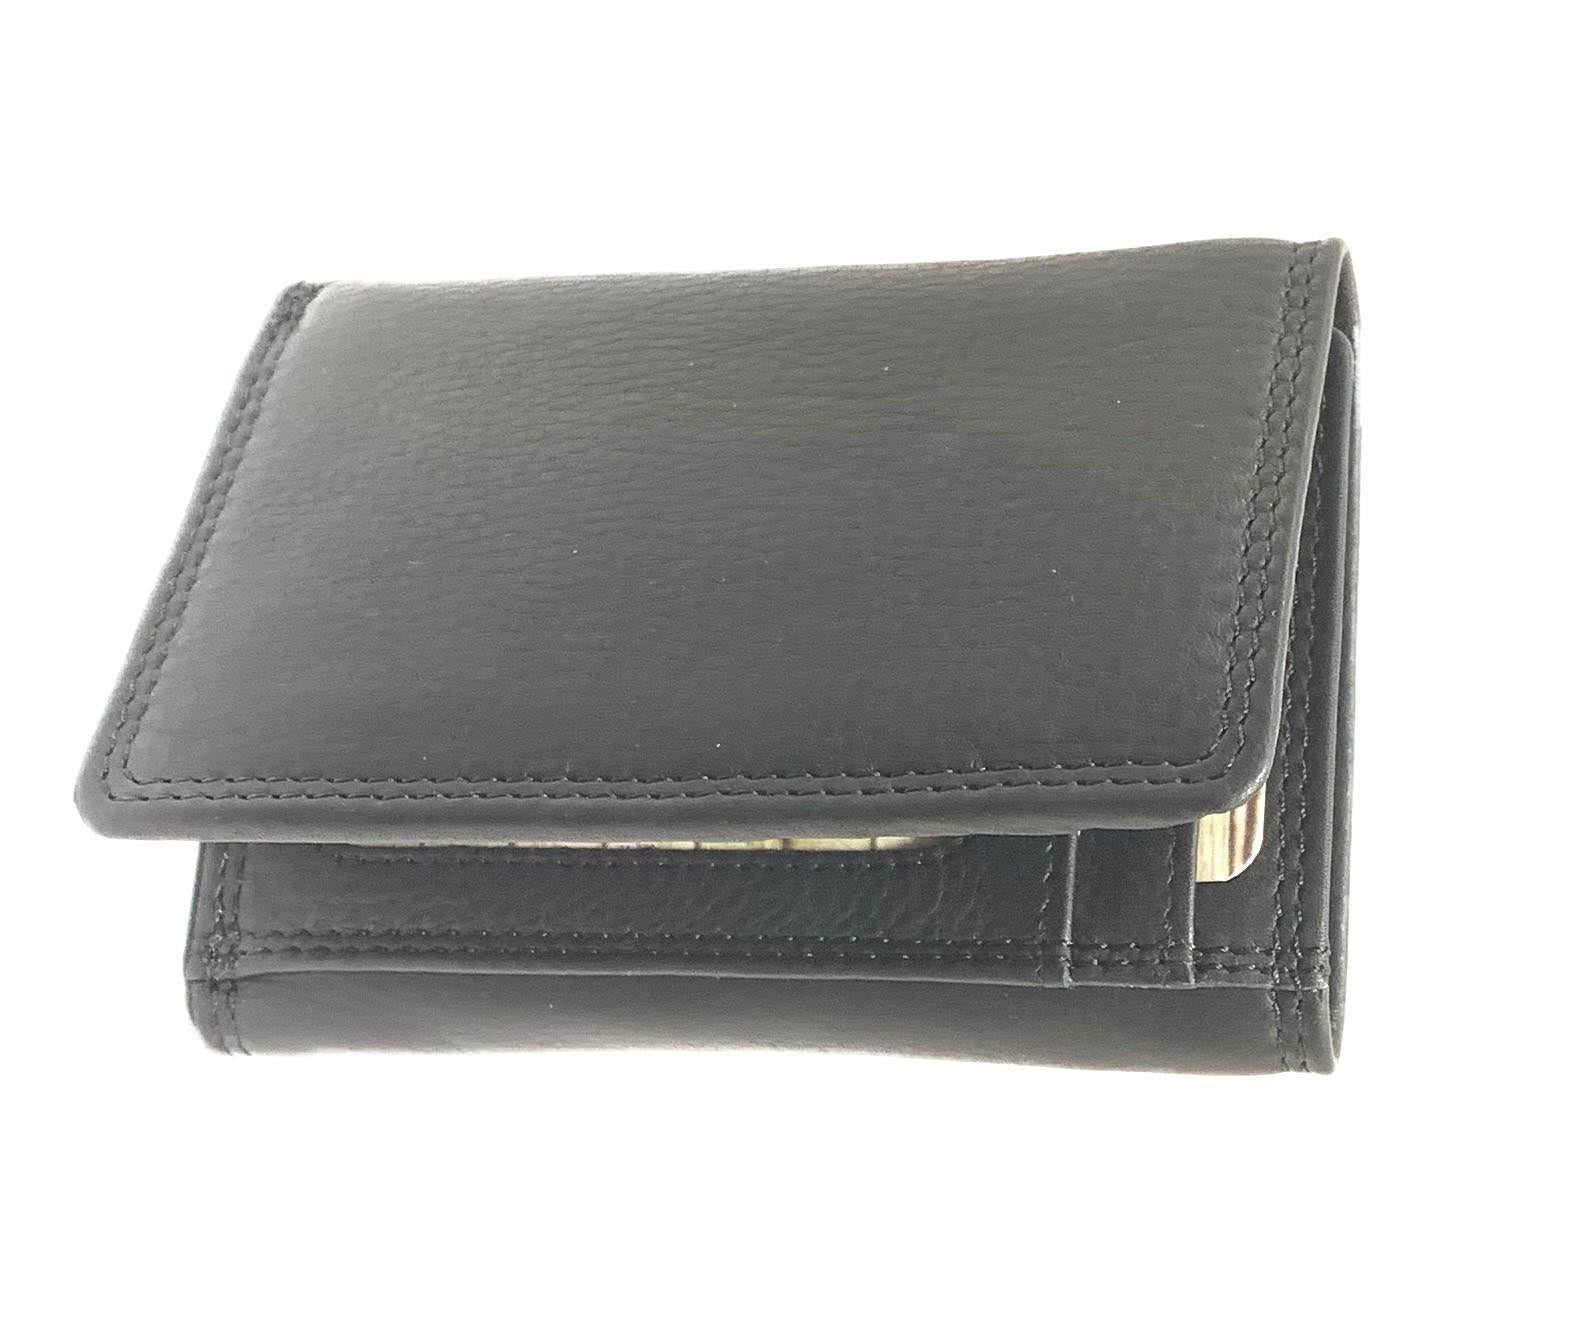 Rugged Earth Leather Trifold Wallet